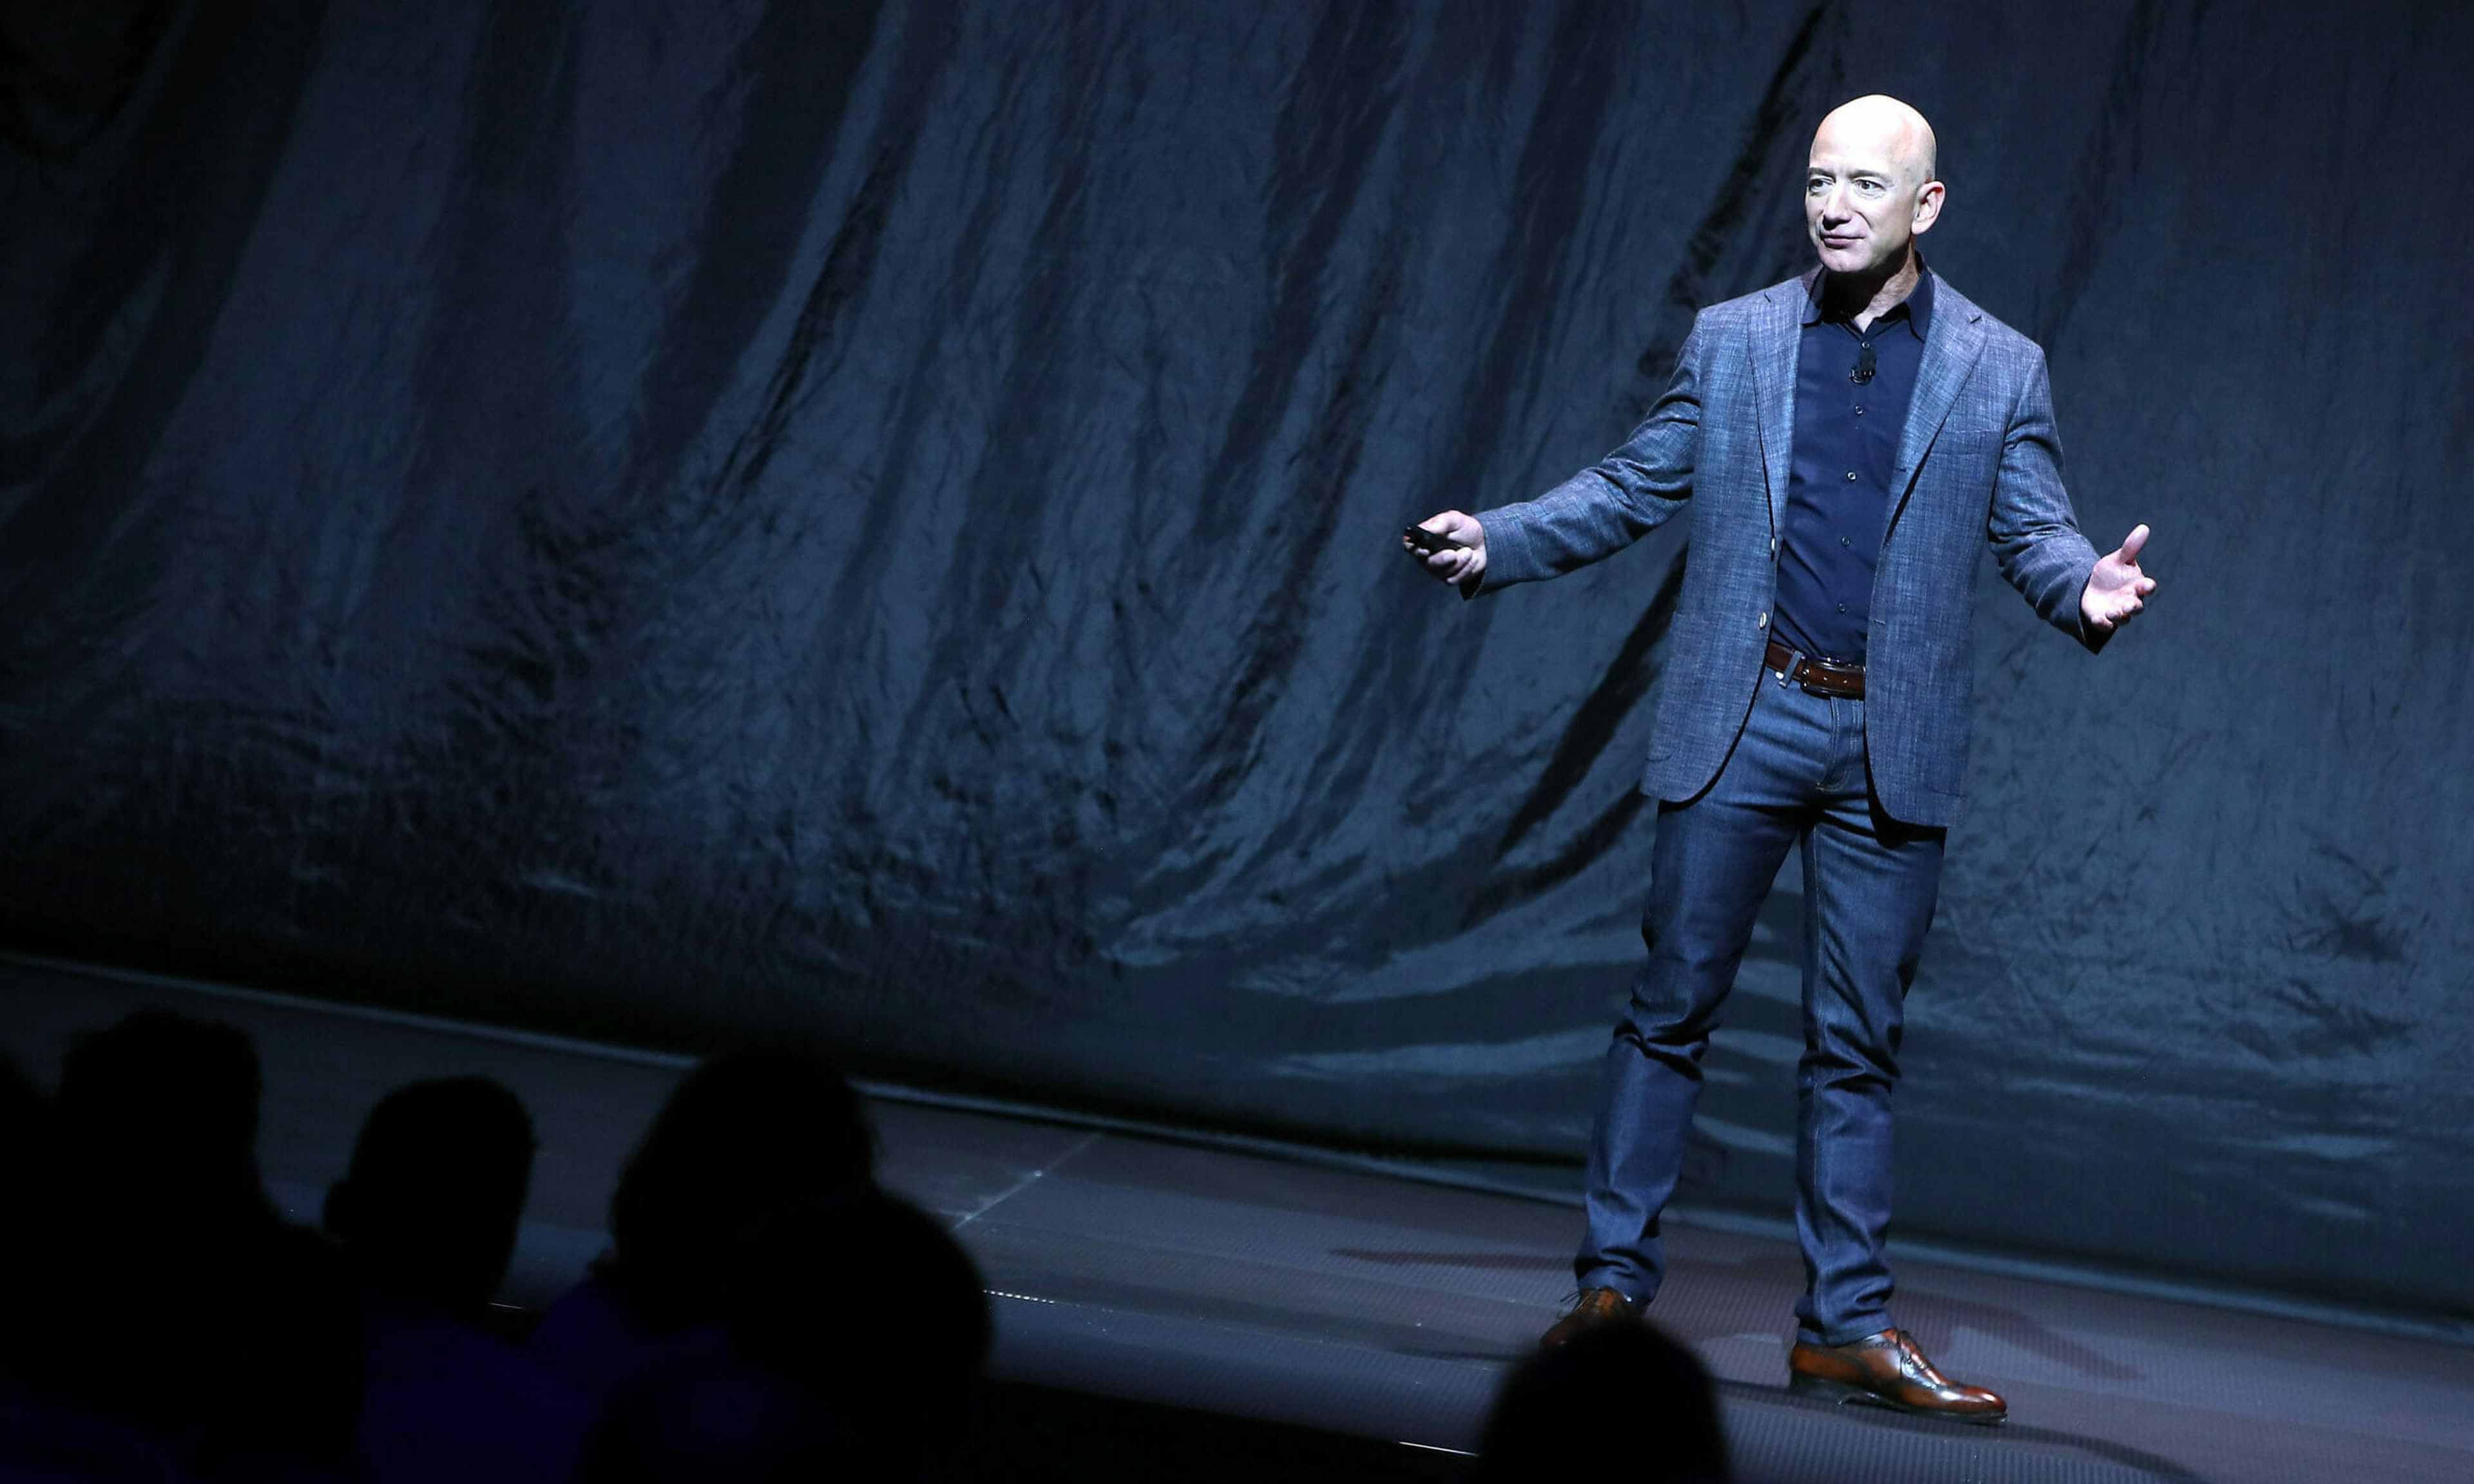 Jeff Bezos, owner of Blue Origin, speaks about outer space before unveiling a new lunar landing module called Blue Moon, during an event at the Washington Convention Center, May 9, 2019 in Washington, DC. Bezos said the lunar module will be used to land humans the moon once again.
 (Mark Wilson/Getty Images)